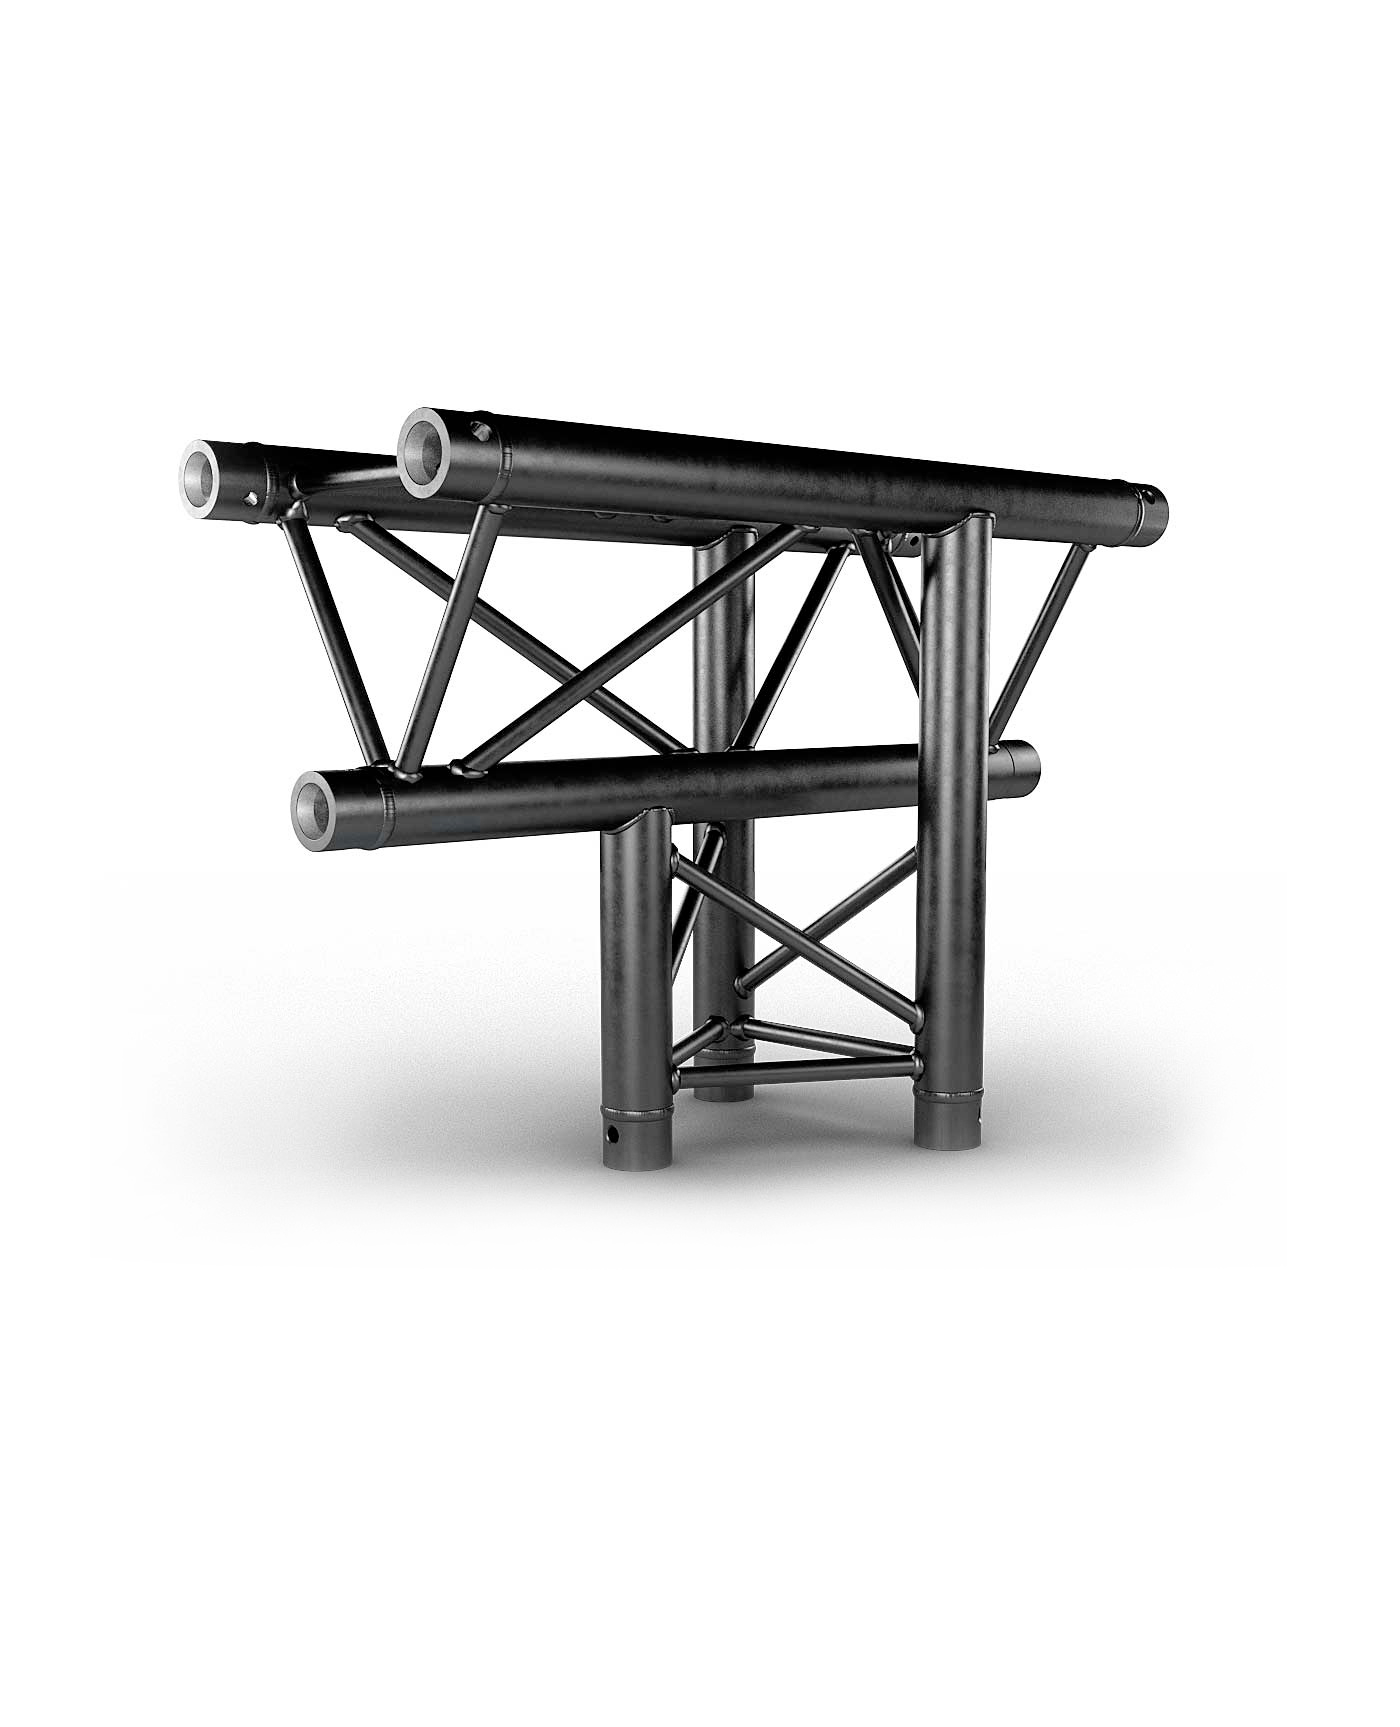 TRUSS TRIO 290 Vertical tee - Black - 3 directions - Top down - Connection kits included